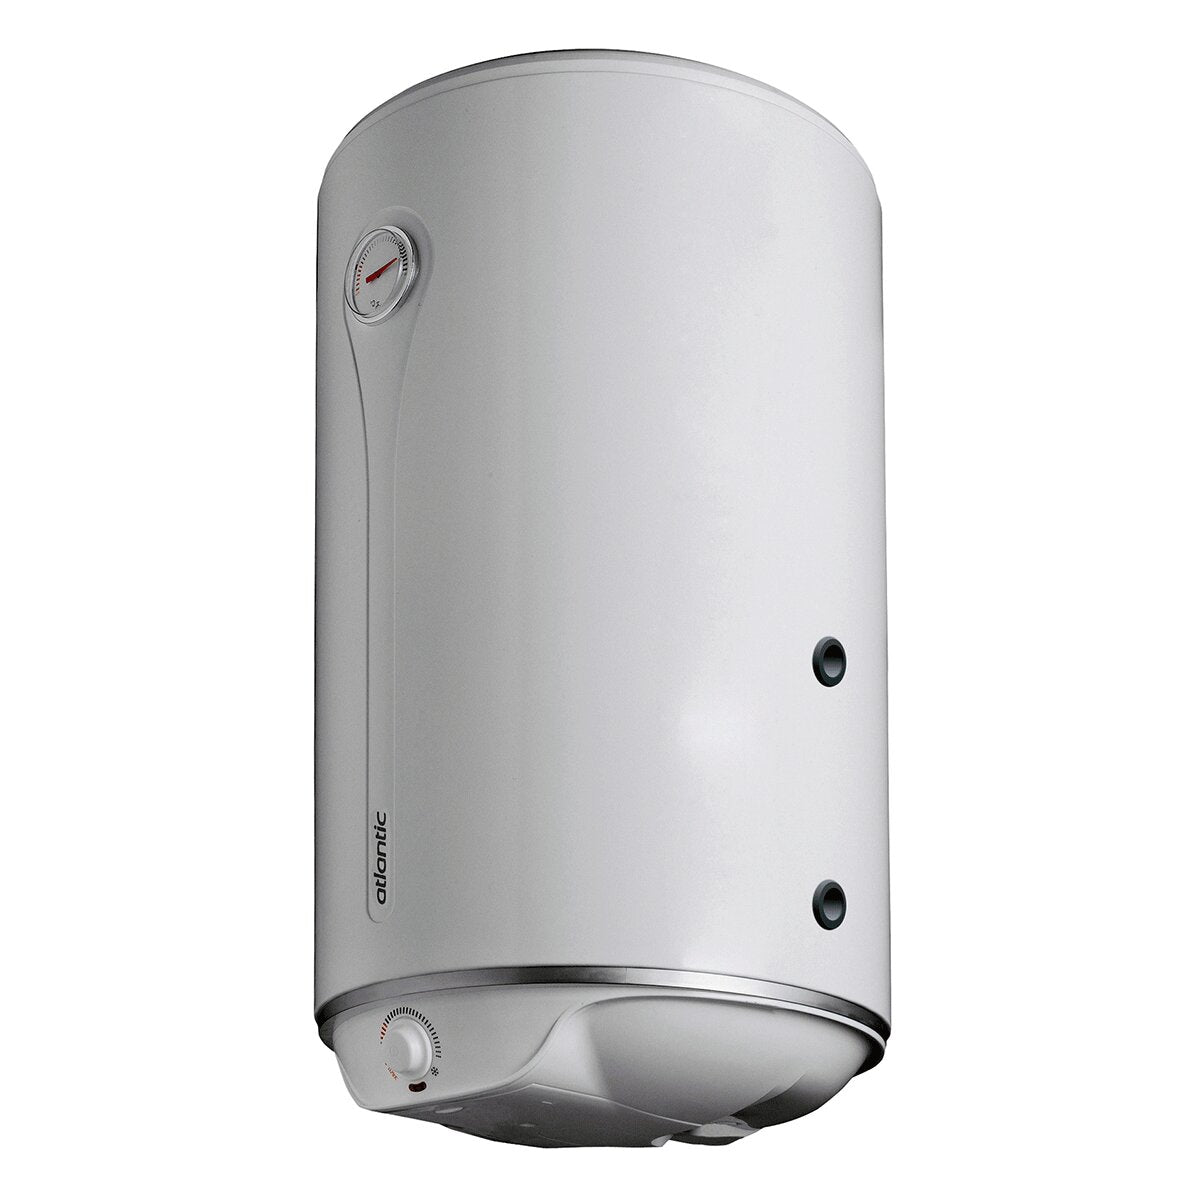 Atlantic Combi MG 100 thermo electric water heater 100 liters vertical right connections 2 year warranty